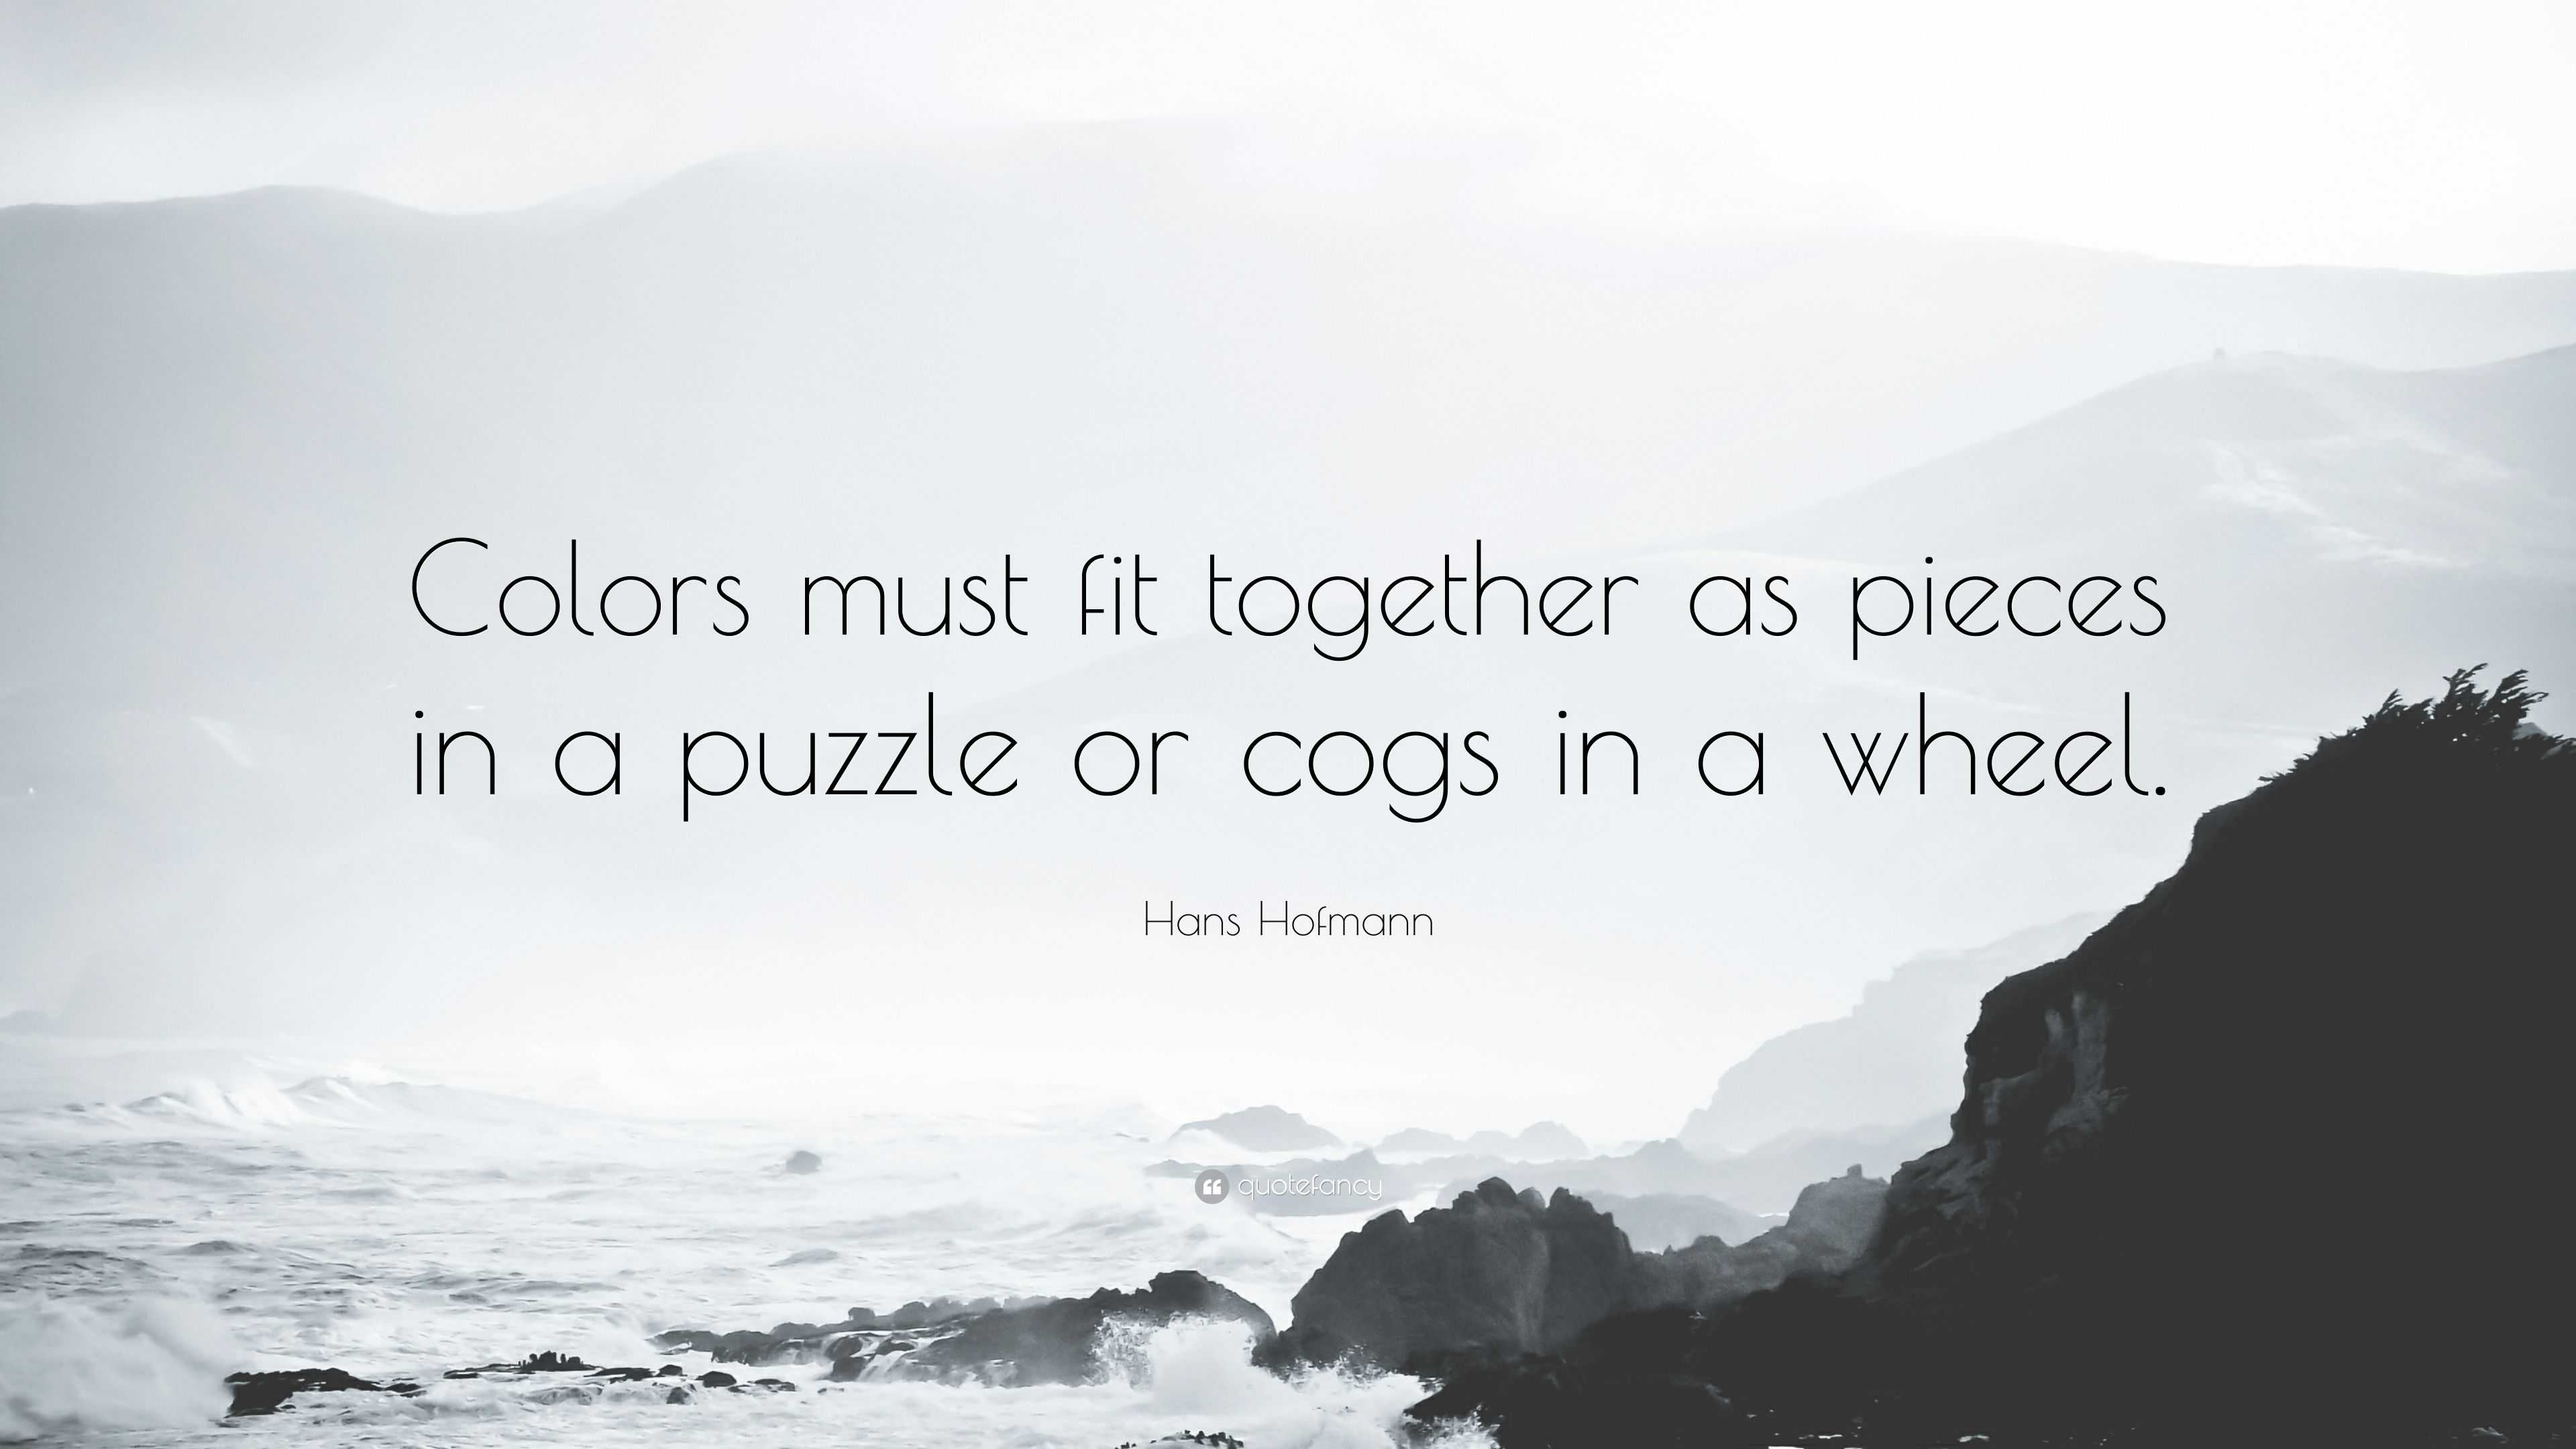 Hofmann Quote: “Colors must fit together as pieces a puzzle or cogs in a